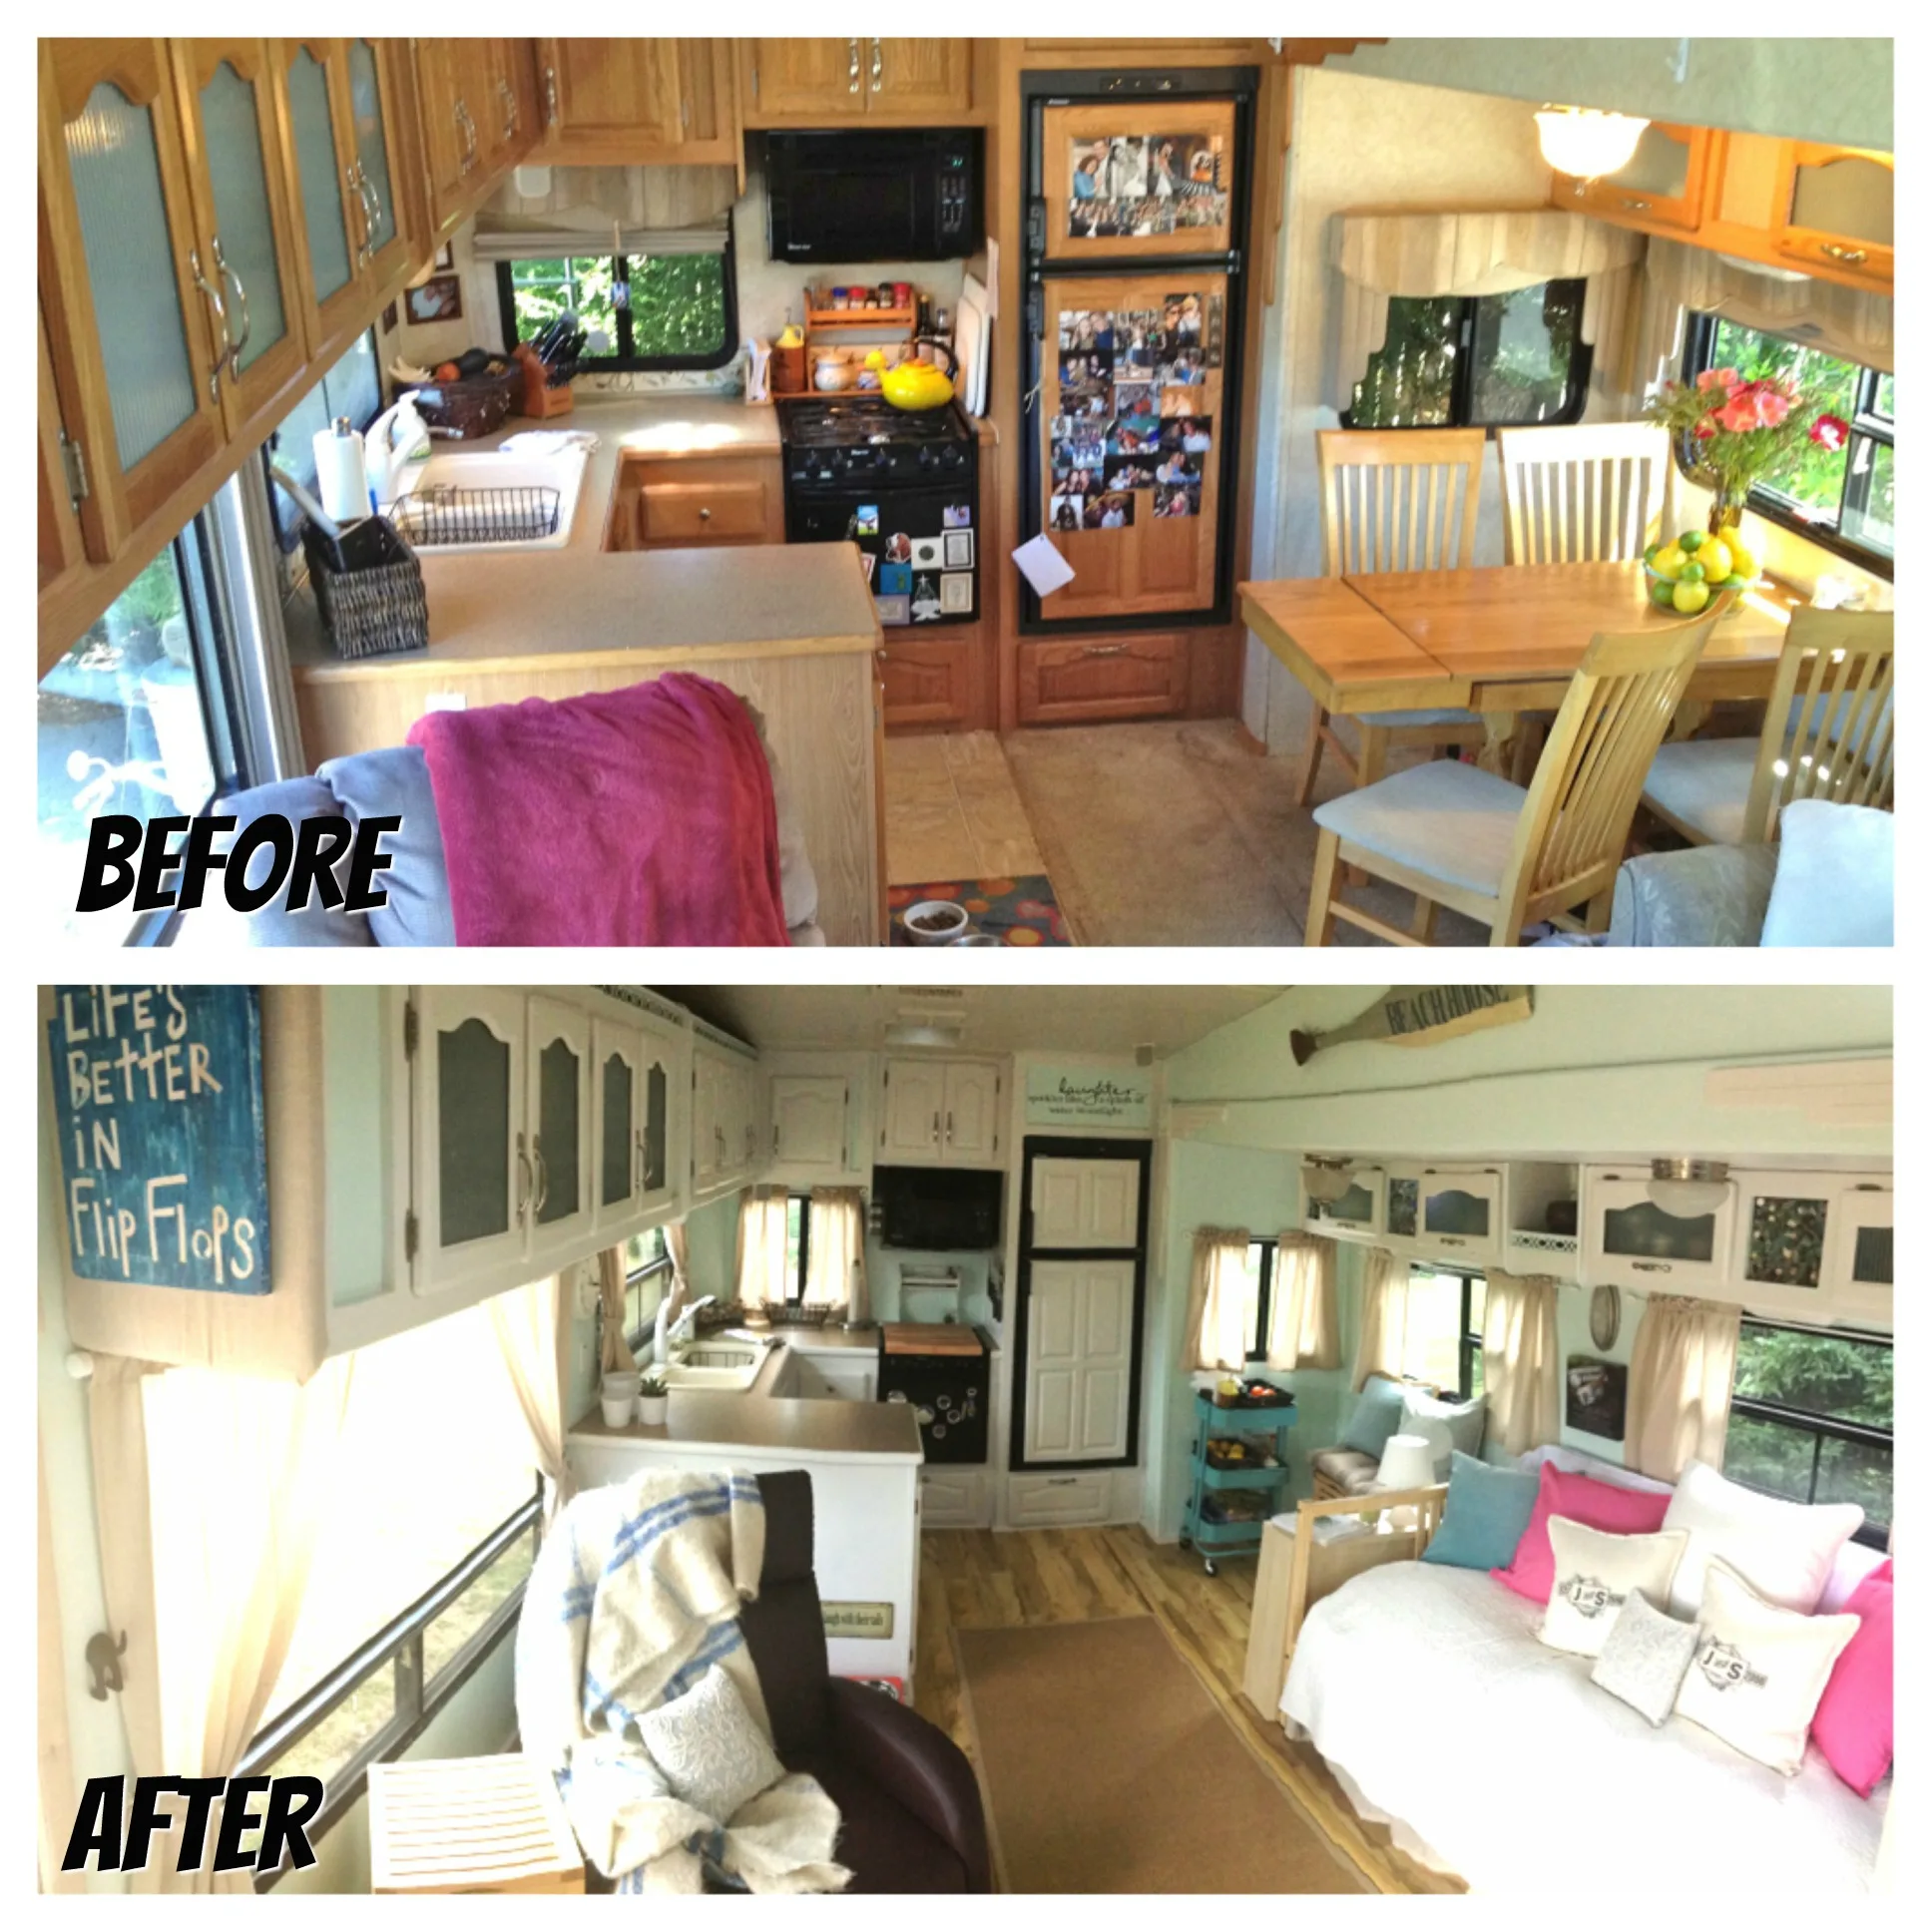 RVObsession - Fifth Wheel Renovations - See how Stephanie and Jim have turned this fifth wheel camper into their haven home.